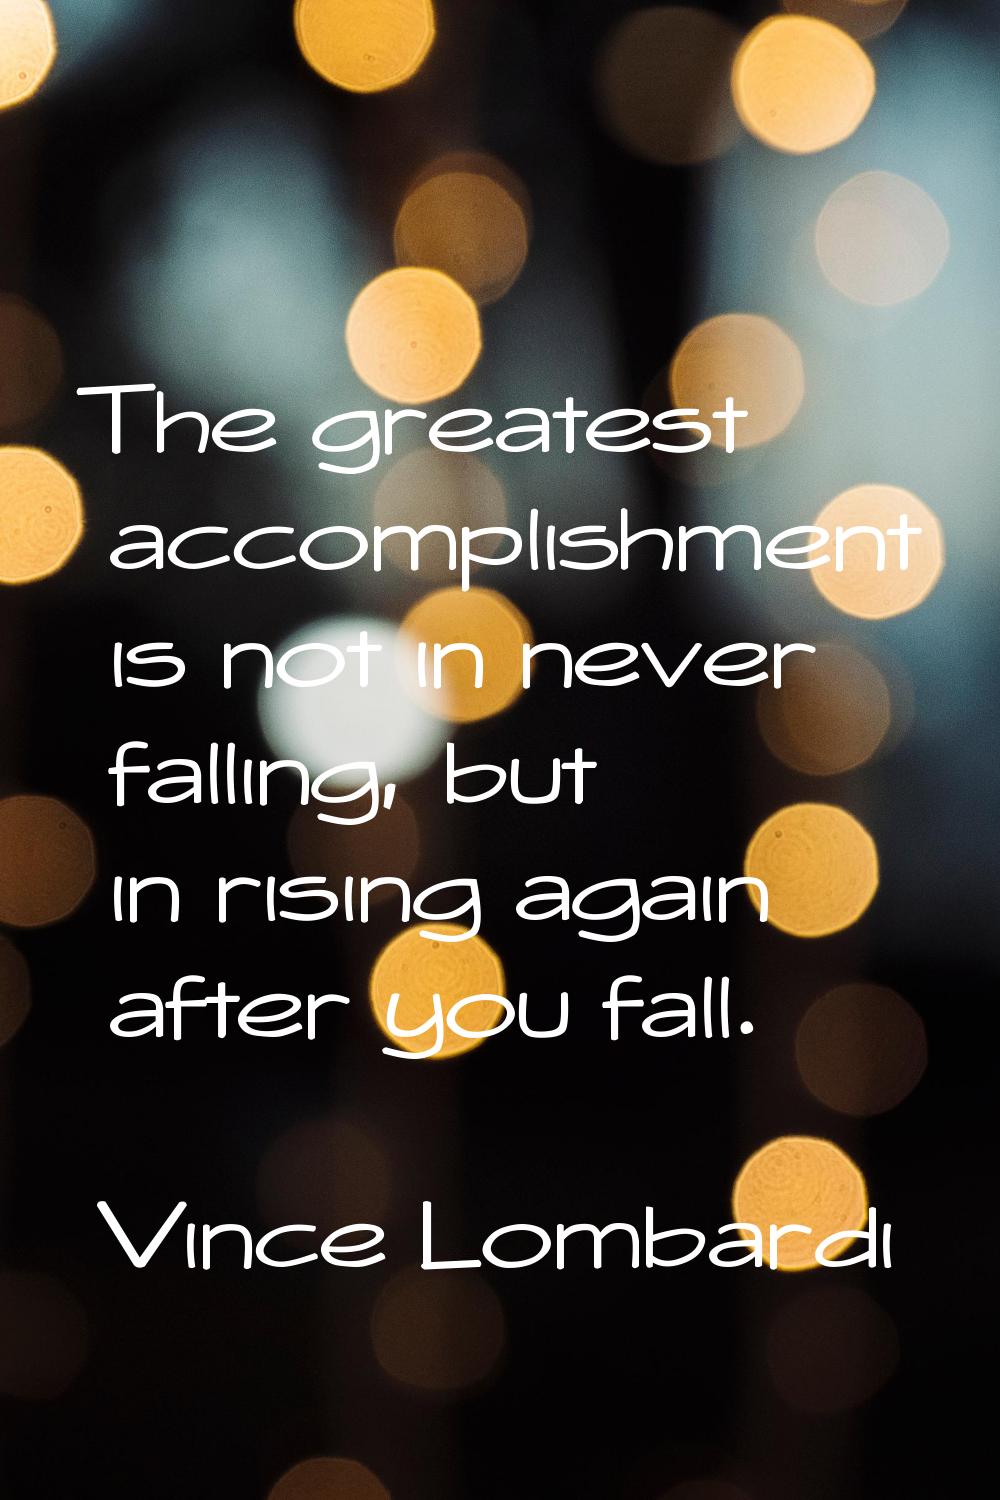 The greatest accomplishment is not in never falling, but in rising again after you fall.